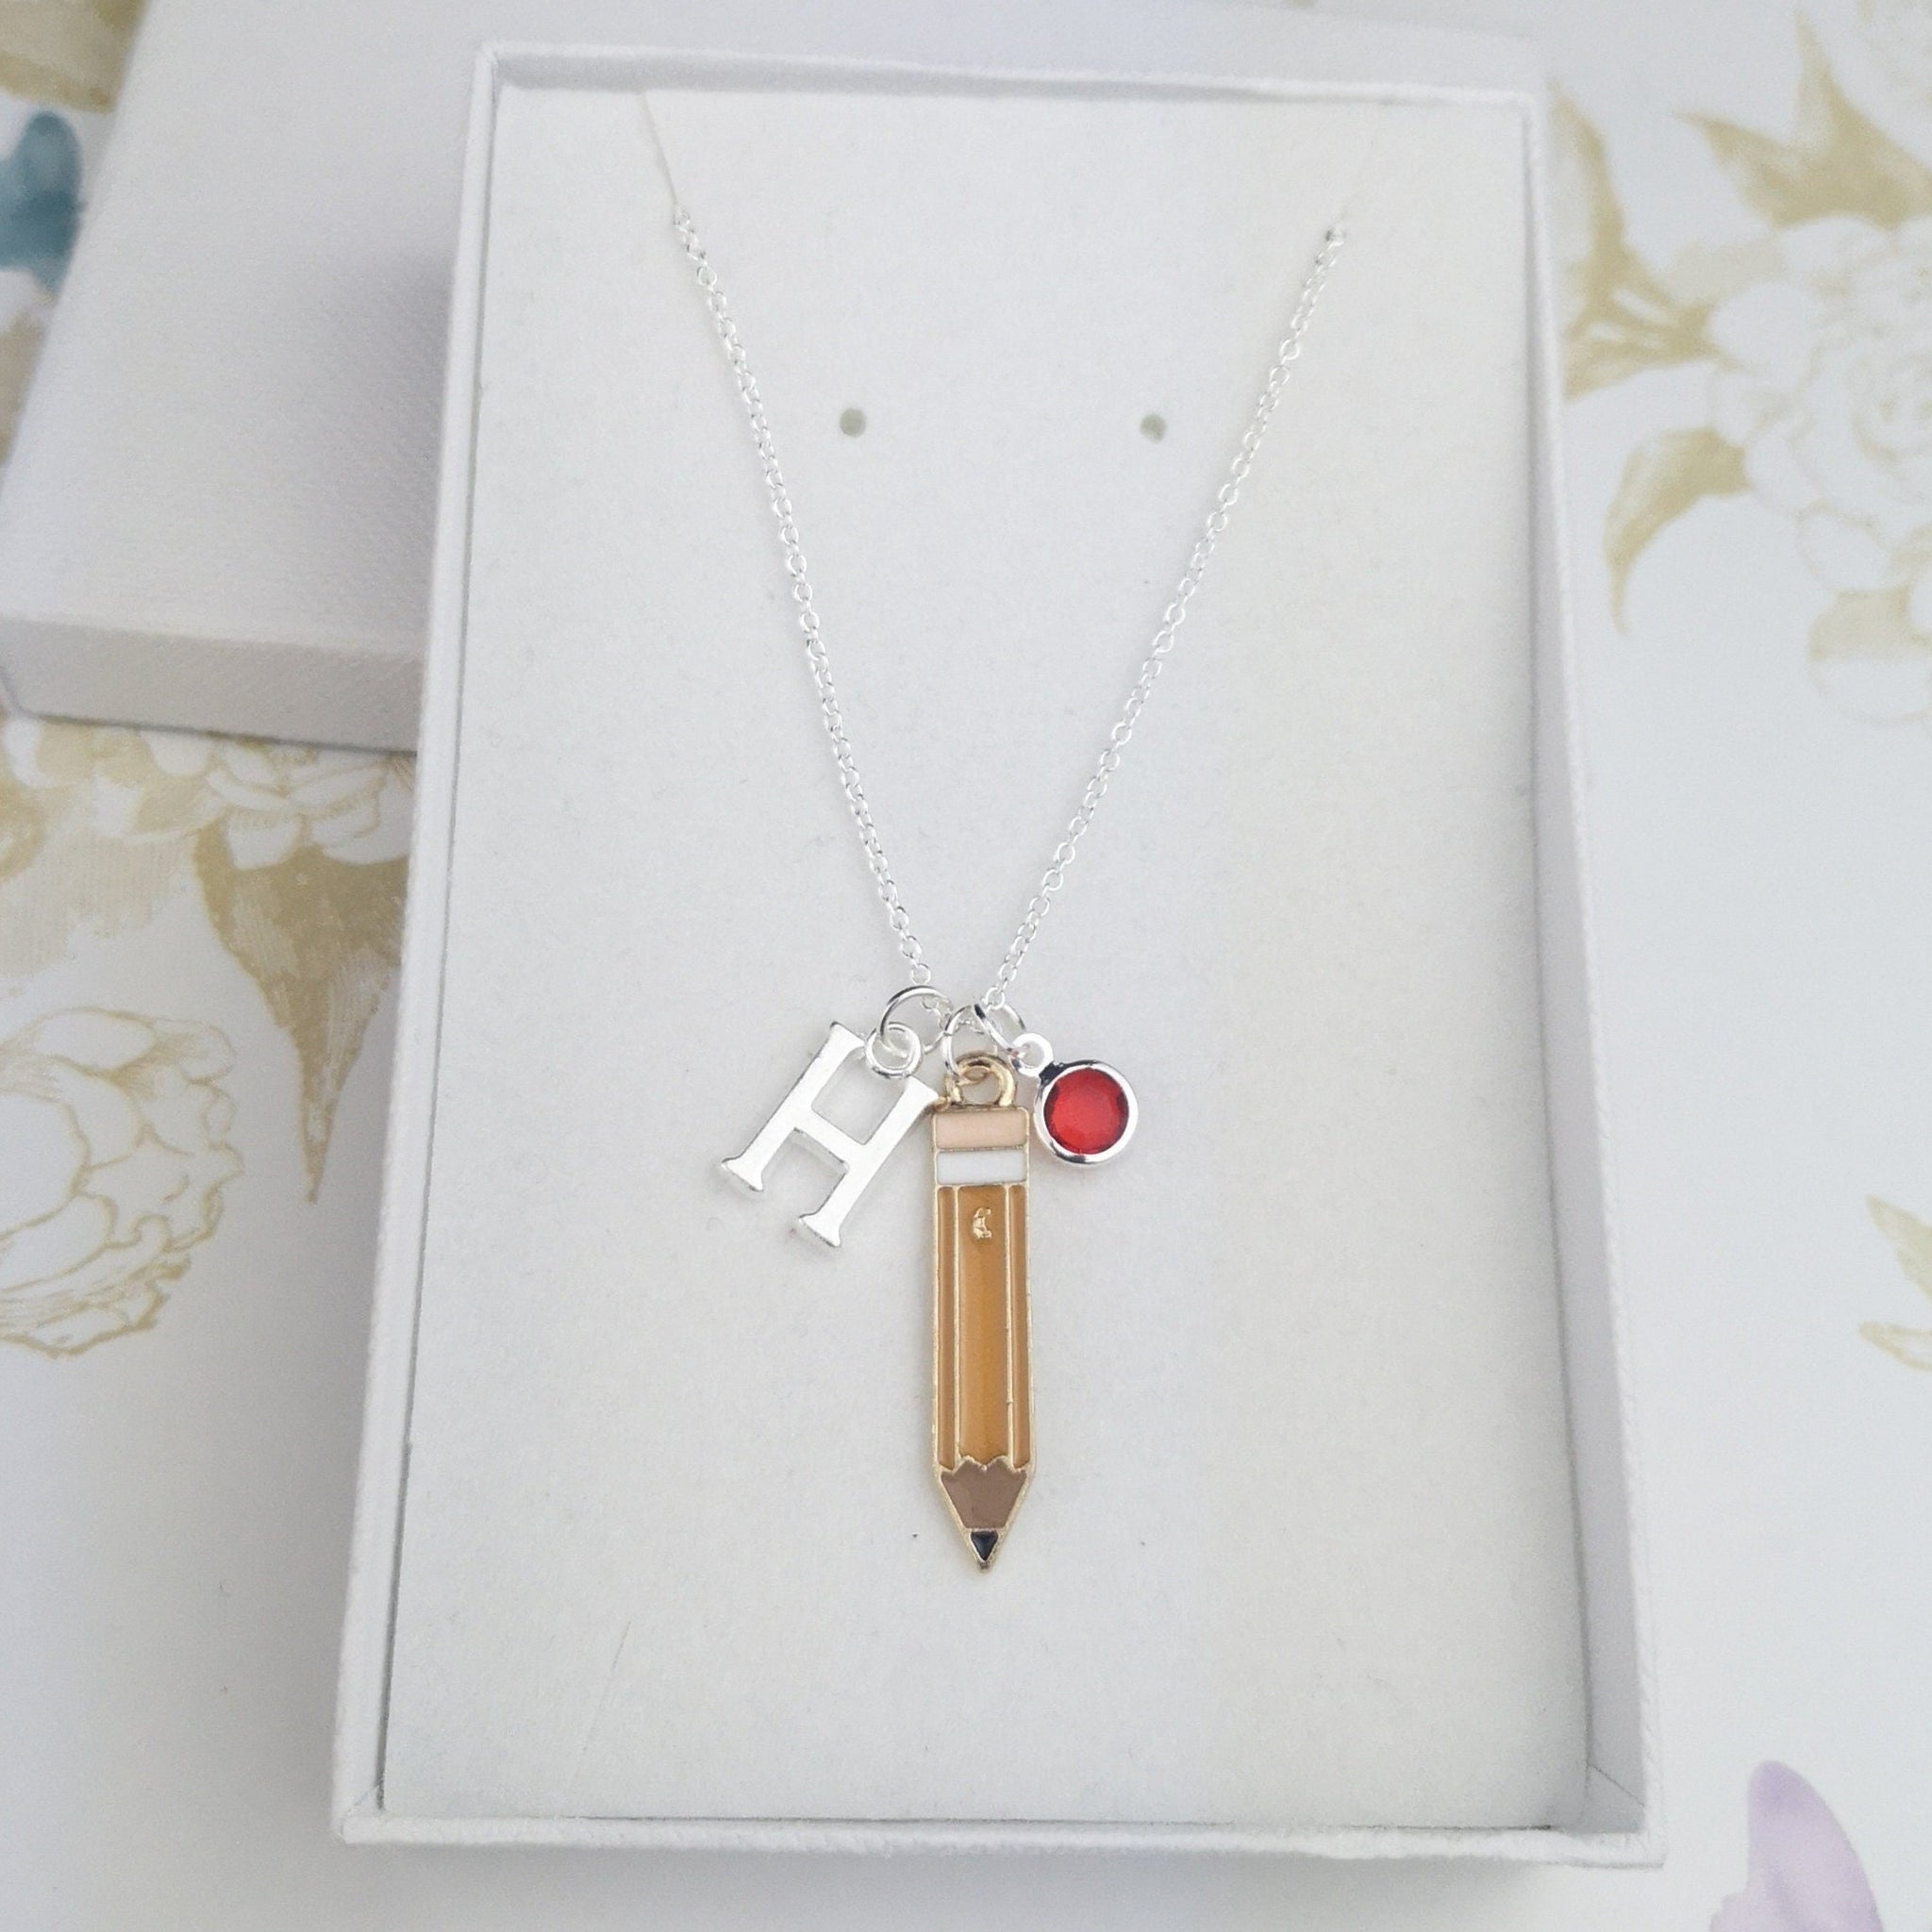 Personalised pencil silver necklace